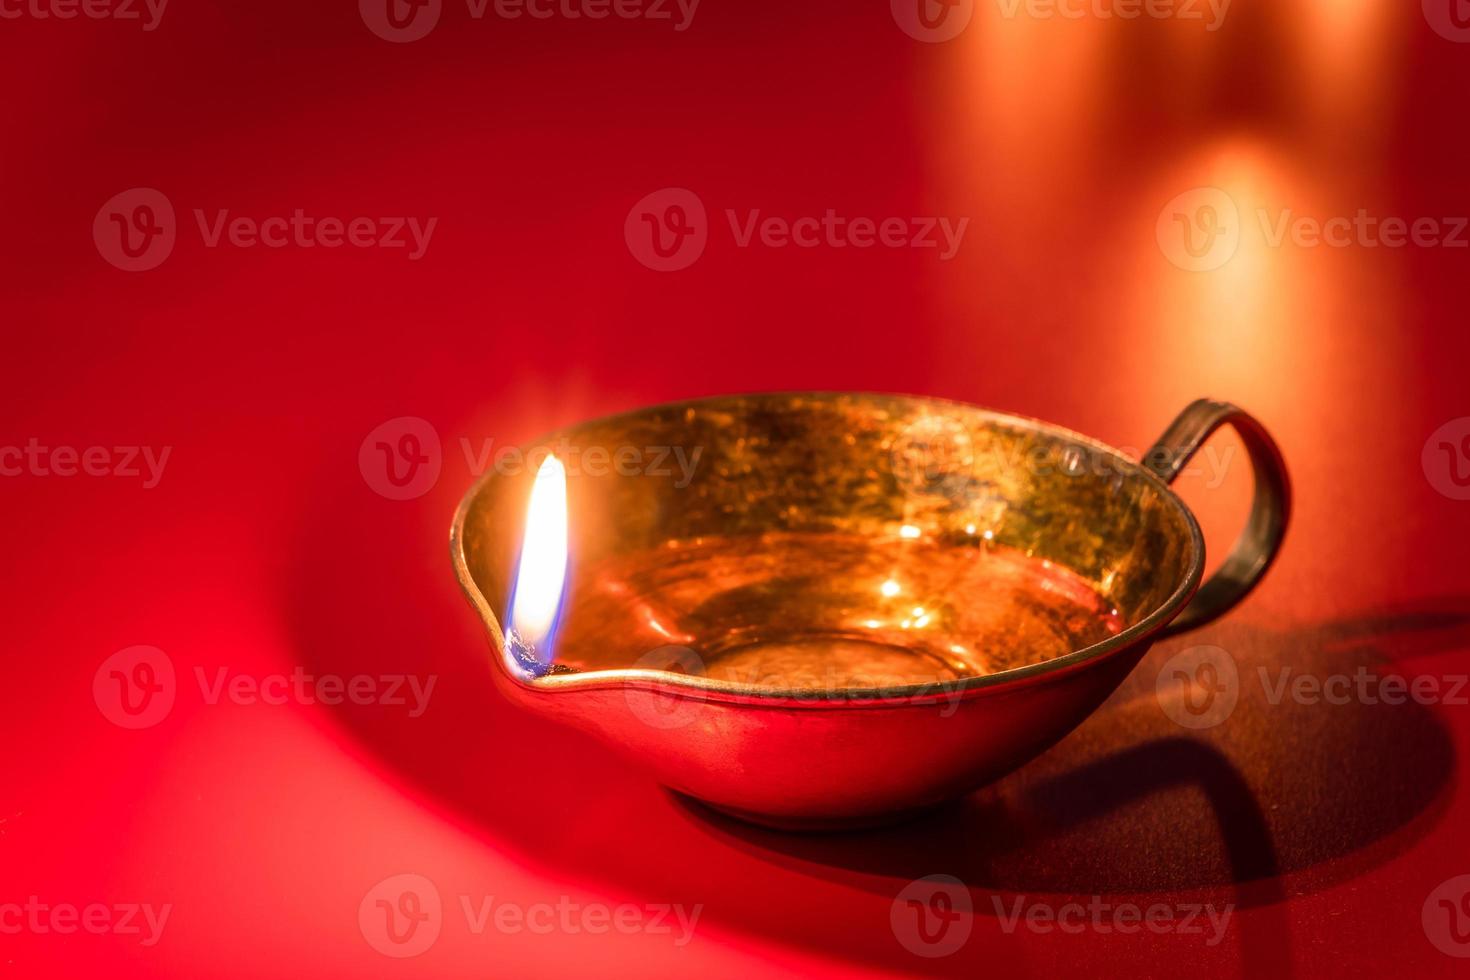 Burning diya oil lamp on red background. Celebrating the Indian traditional festival of light. Happy Diwali. photo